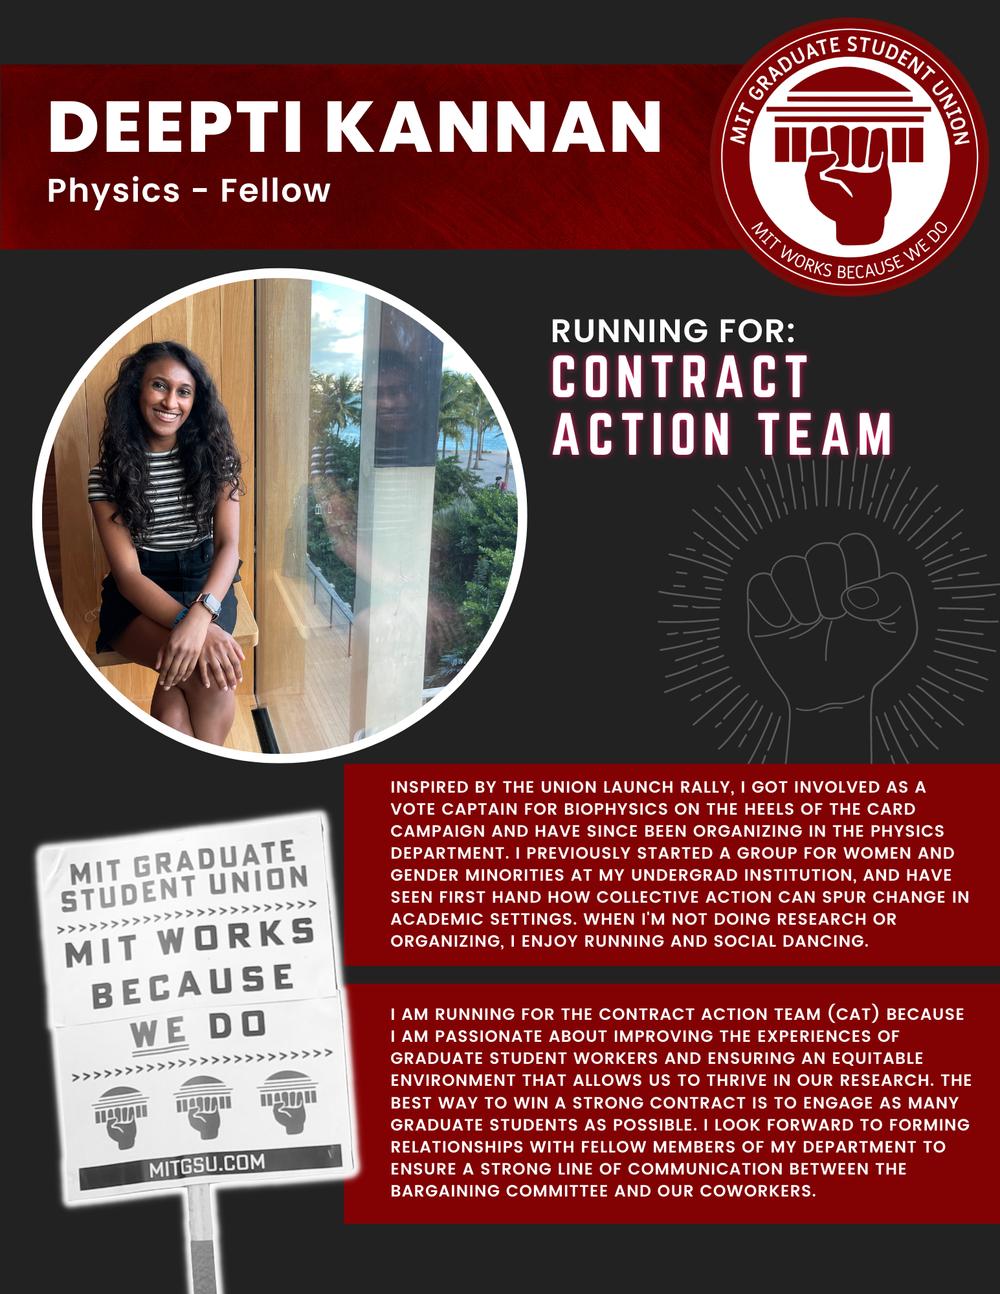  DEEPTI KANNAN Physics - Fellow   RUNNING FOR: Contract Action Team  INSPIRED BY THE UNION LAUNCH RALLY, I GOT INVOLVED AS A VOTE CAPTAIN FOR BIOPHYSICS ON THE HEELS OF THE CARD CAMPAIGN AND HAVE SINCE BEEN ORGANIZING IN THE PHYSICS DEPARTMENT. I PRE